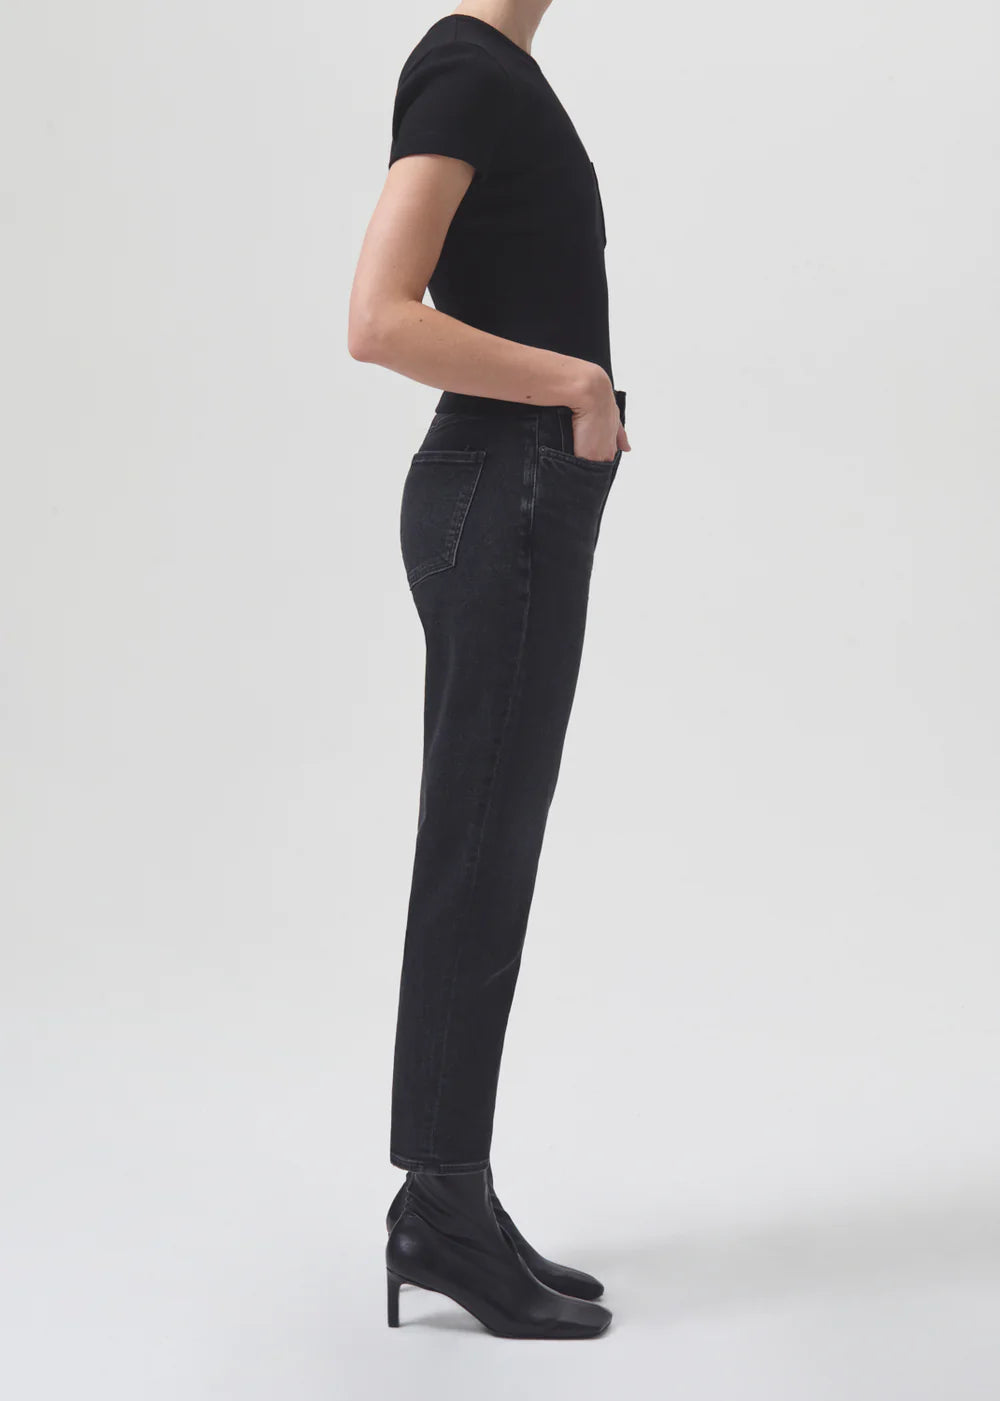 A woman wearing AGOLDE Riley Straight Crop - Panoramic black jeans, a slim straight leg style, and a high-rise black t-shirt.